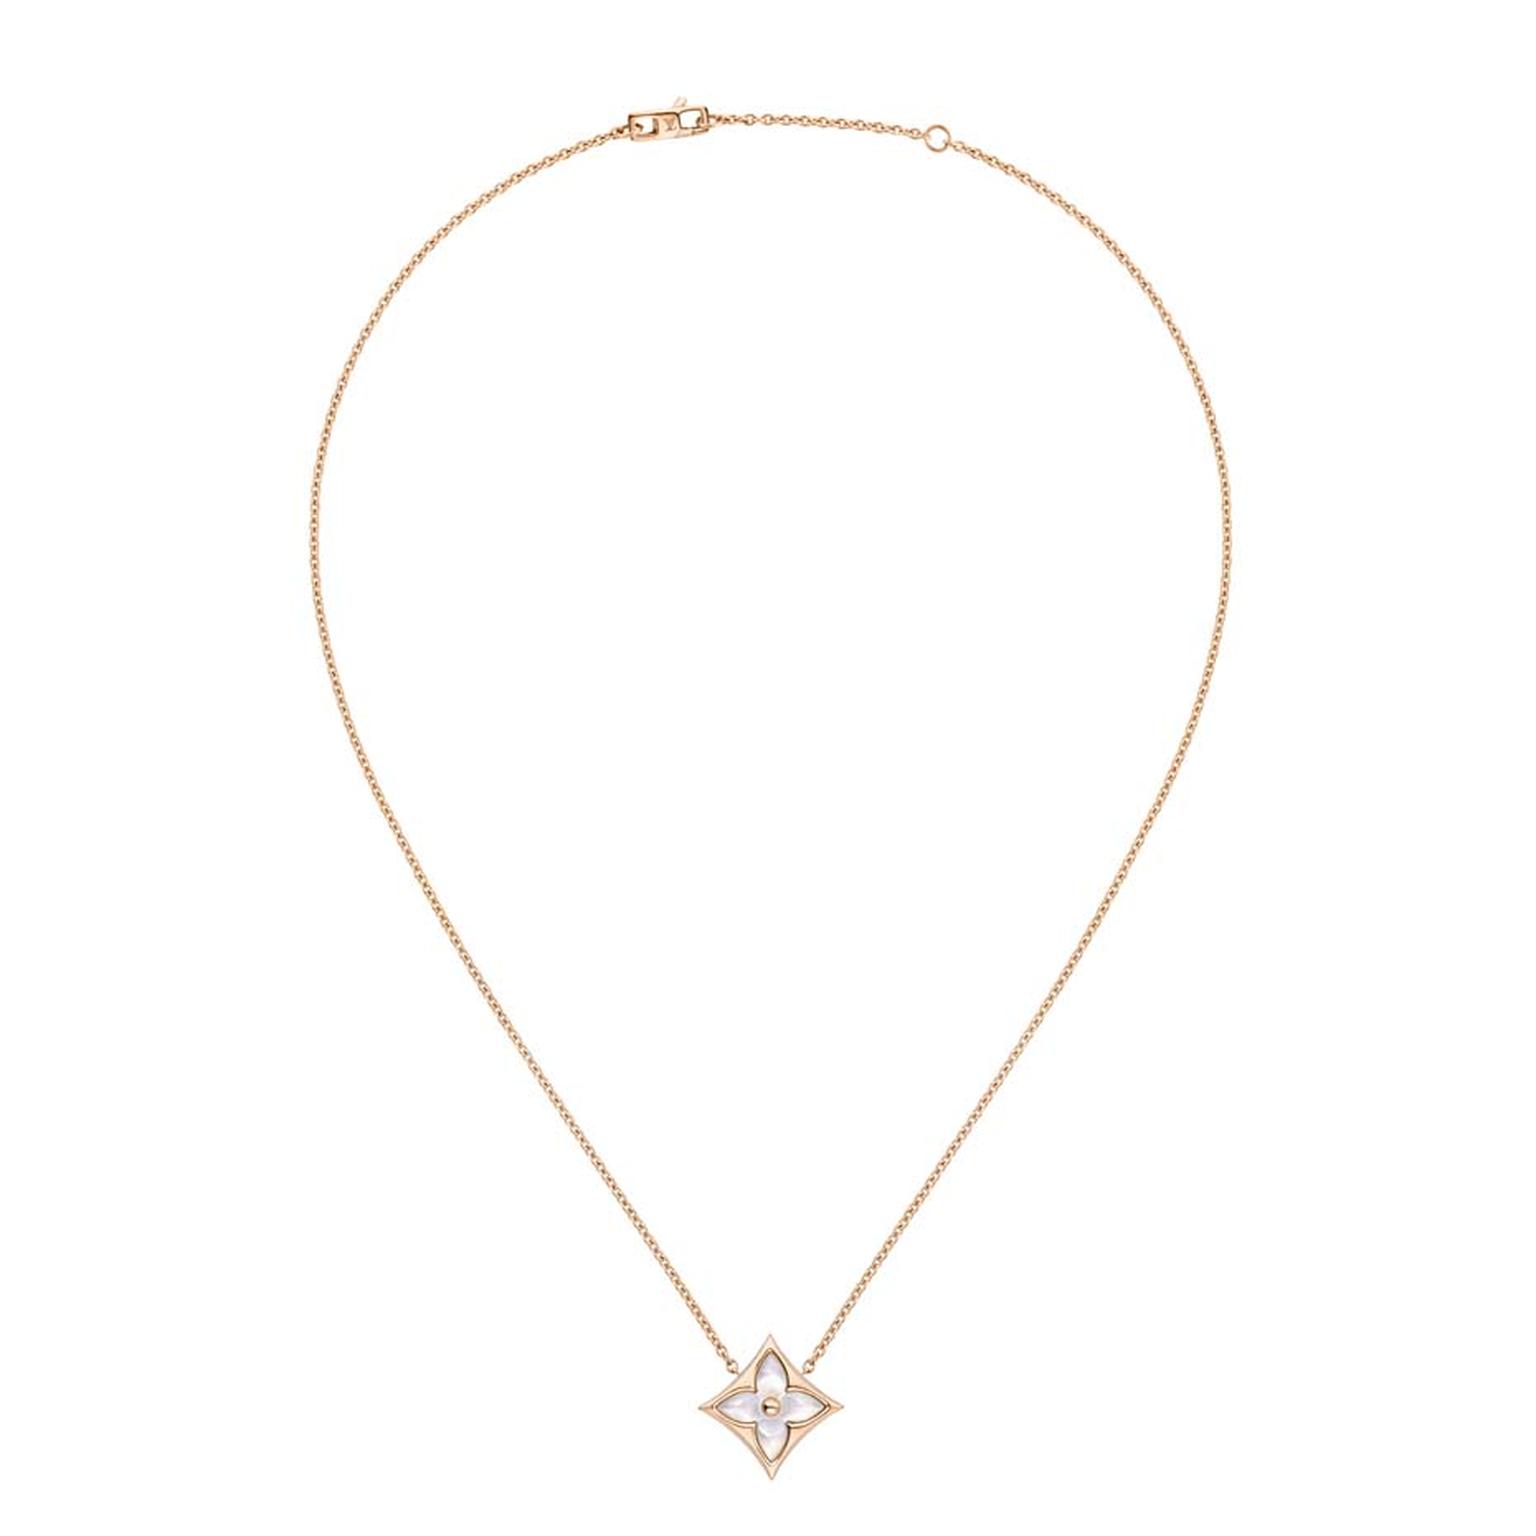 This Louis Vuitton Monogram Star necklace shows how the soft sheen of mother-of-pearl is the perfect companion to the brilliance of diamonds.